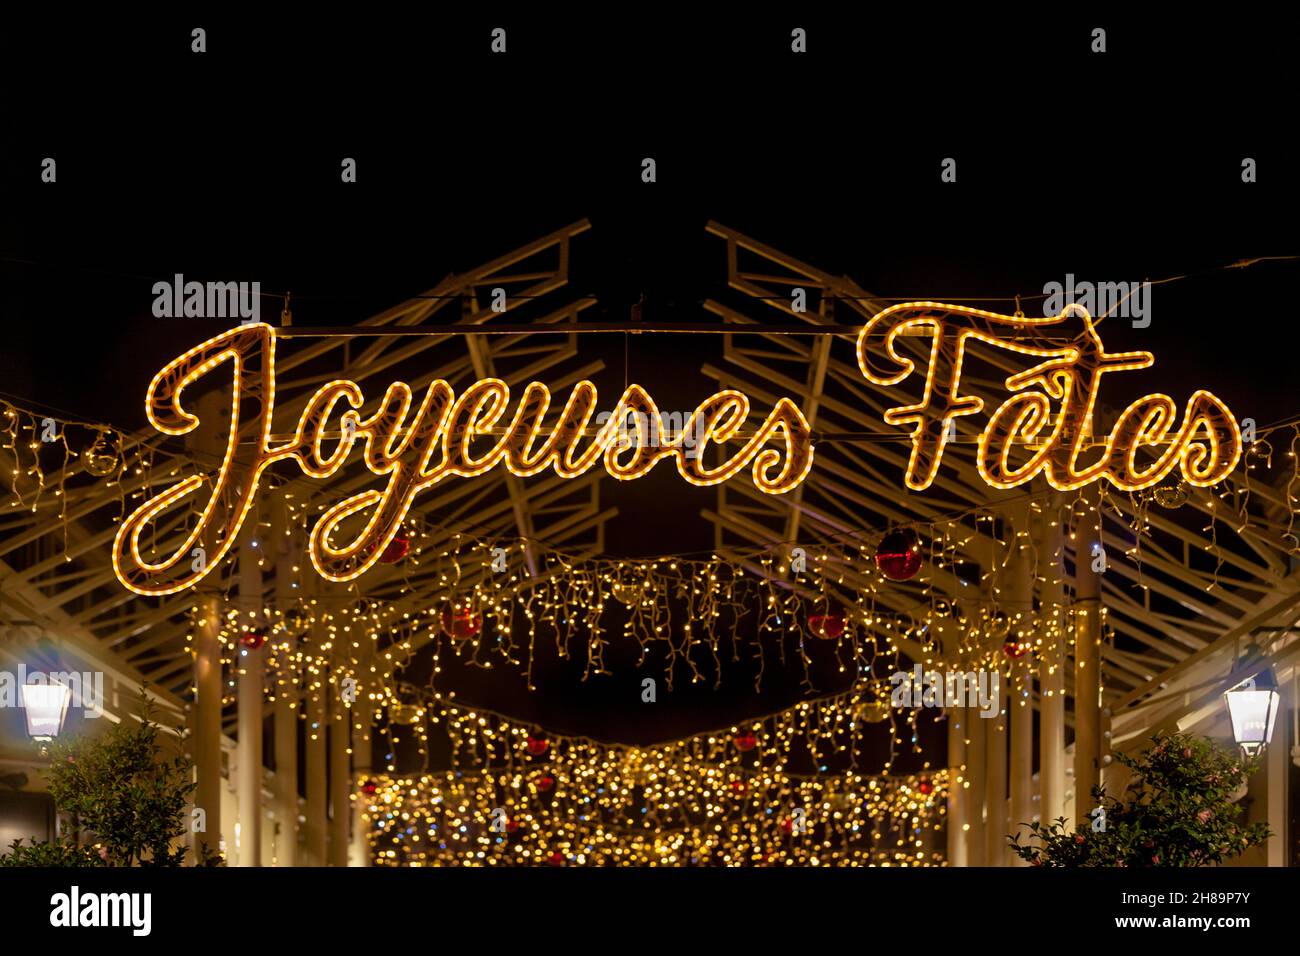 Luci di Natale che dicono in francese - Joyeuses Fetes - significato in inglese - Happy Holidays -. Foto Stock